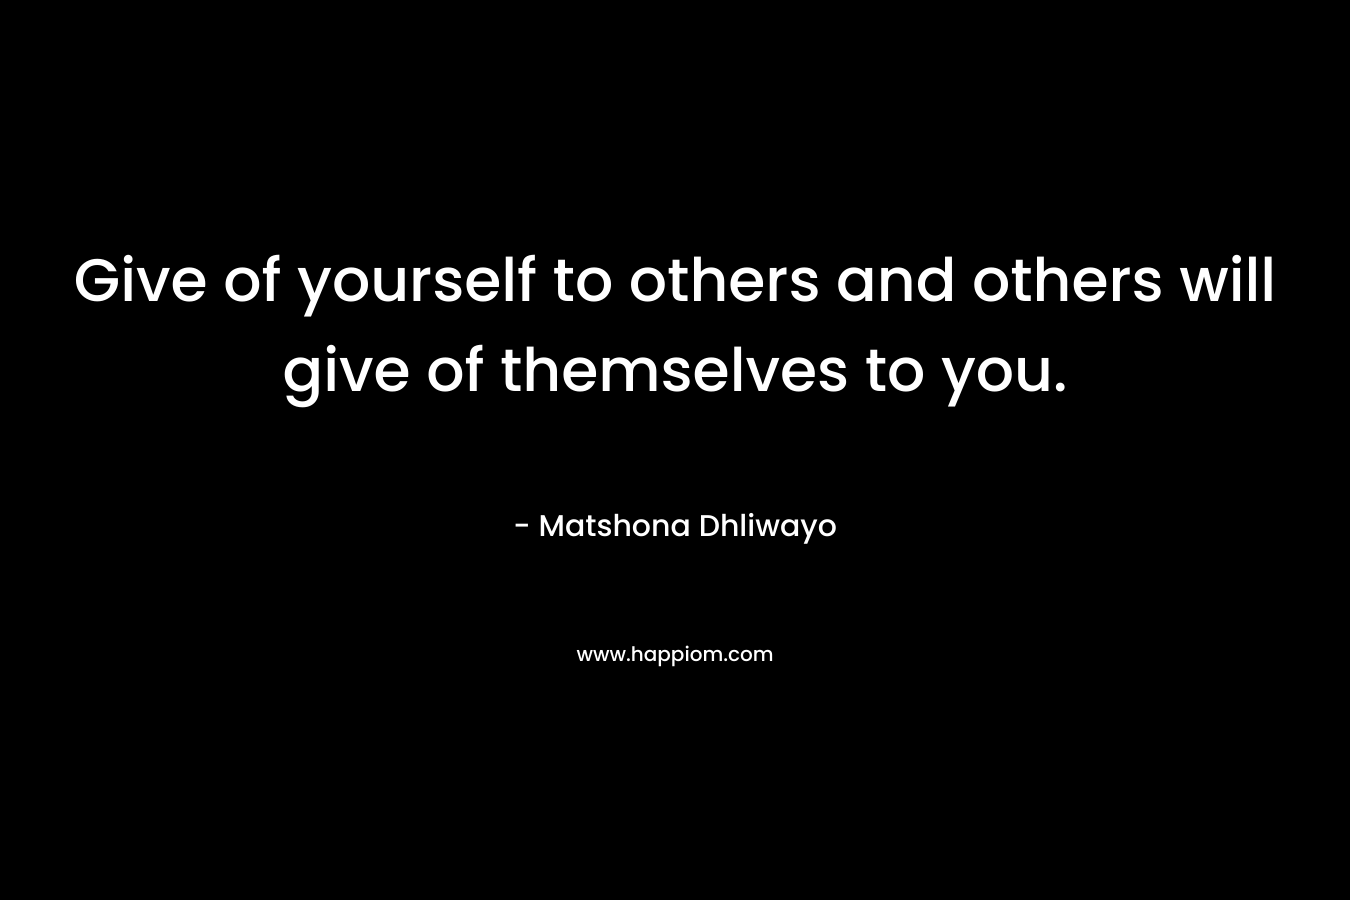 Give of yourself to others and others will give of themselves to you.